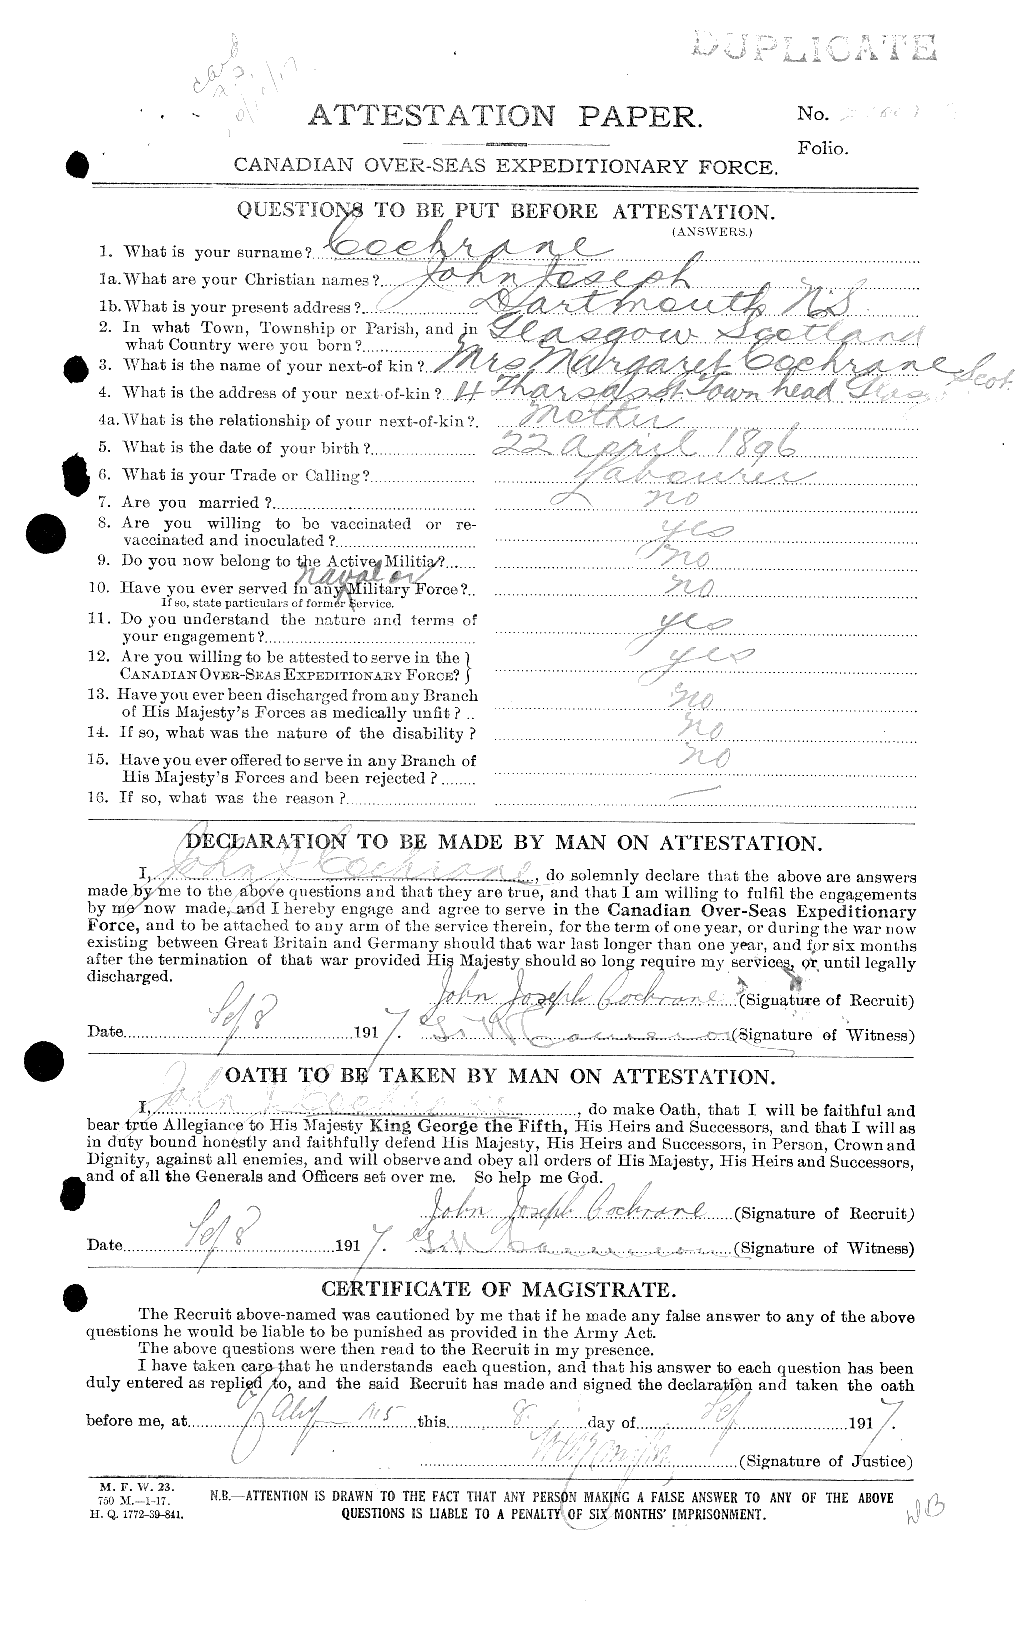 Personnel Records of the First World War - CEF 026418a